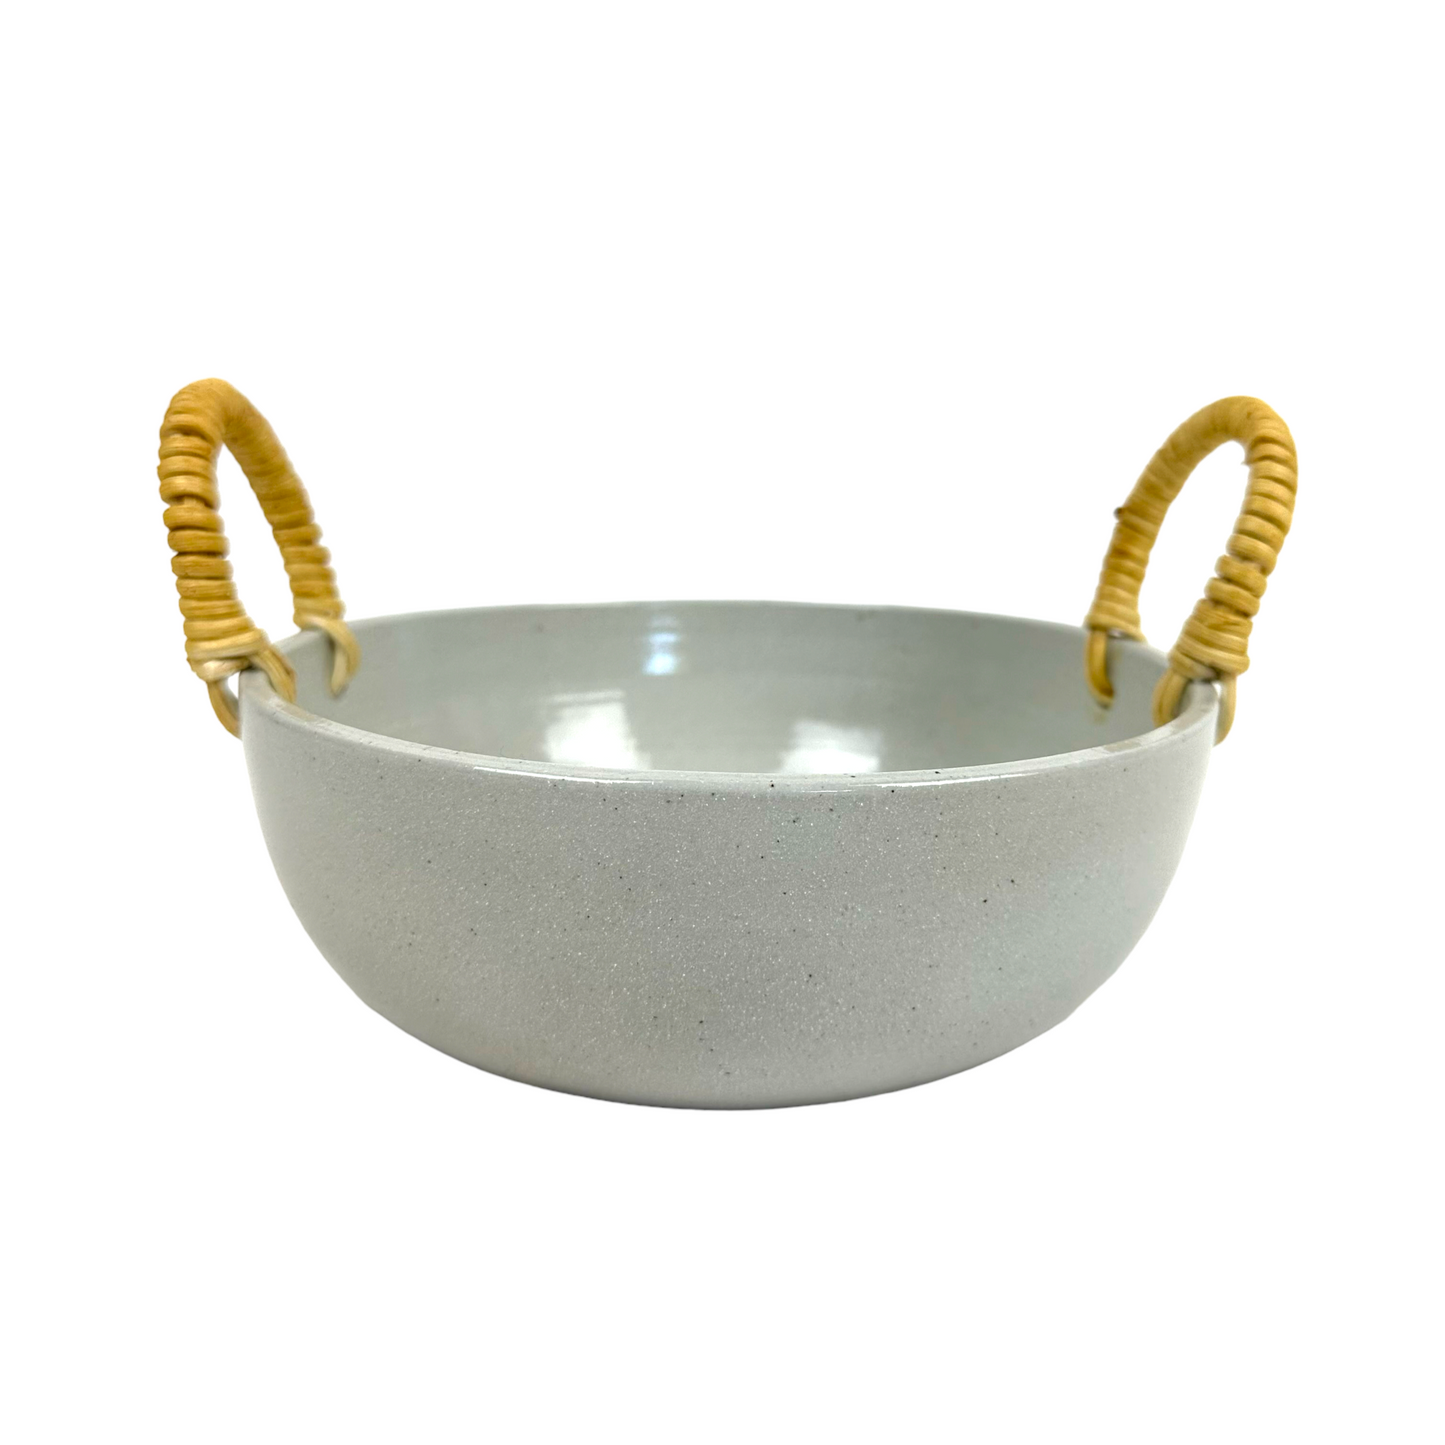 Our Rimbah Ceramic Rattan Bowl is a beautifully handmade, tactile piece, with qualities that are evident in its organic shape and distinctive glazed finish. The subtle cream stoneware accented by Rattan handles brings a stylish aesthetic to your table.